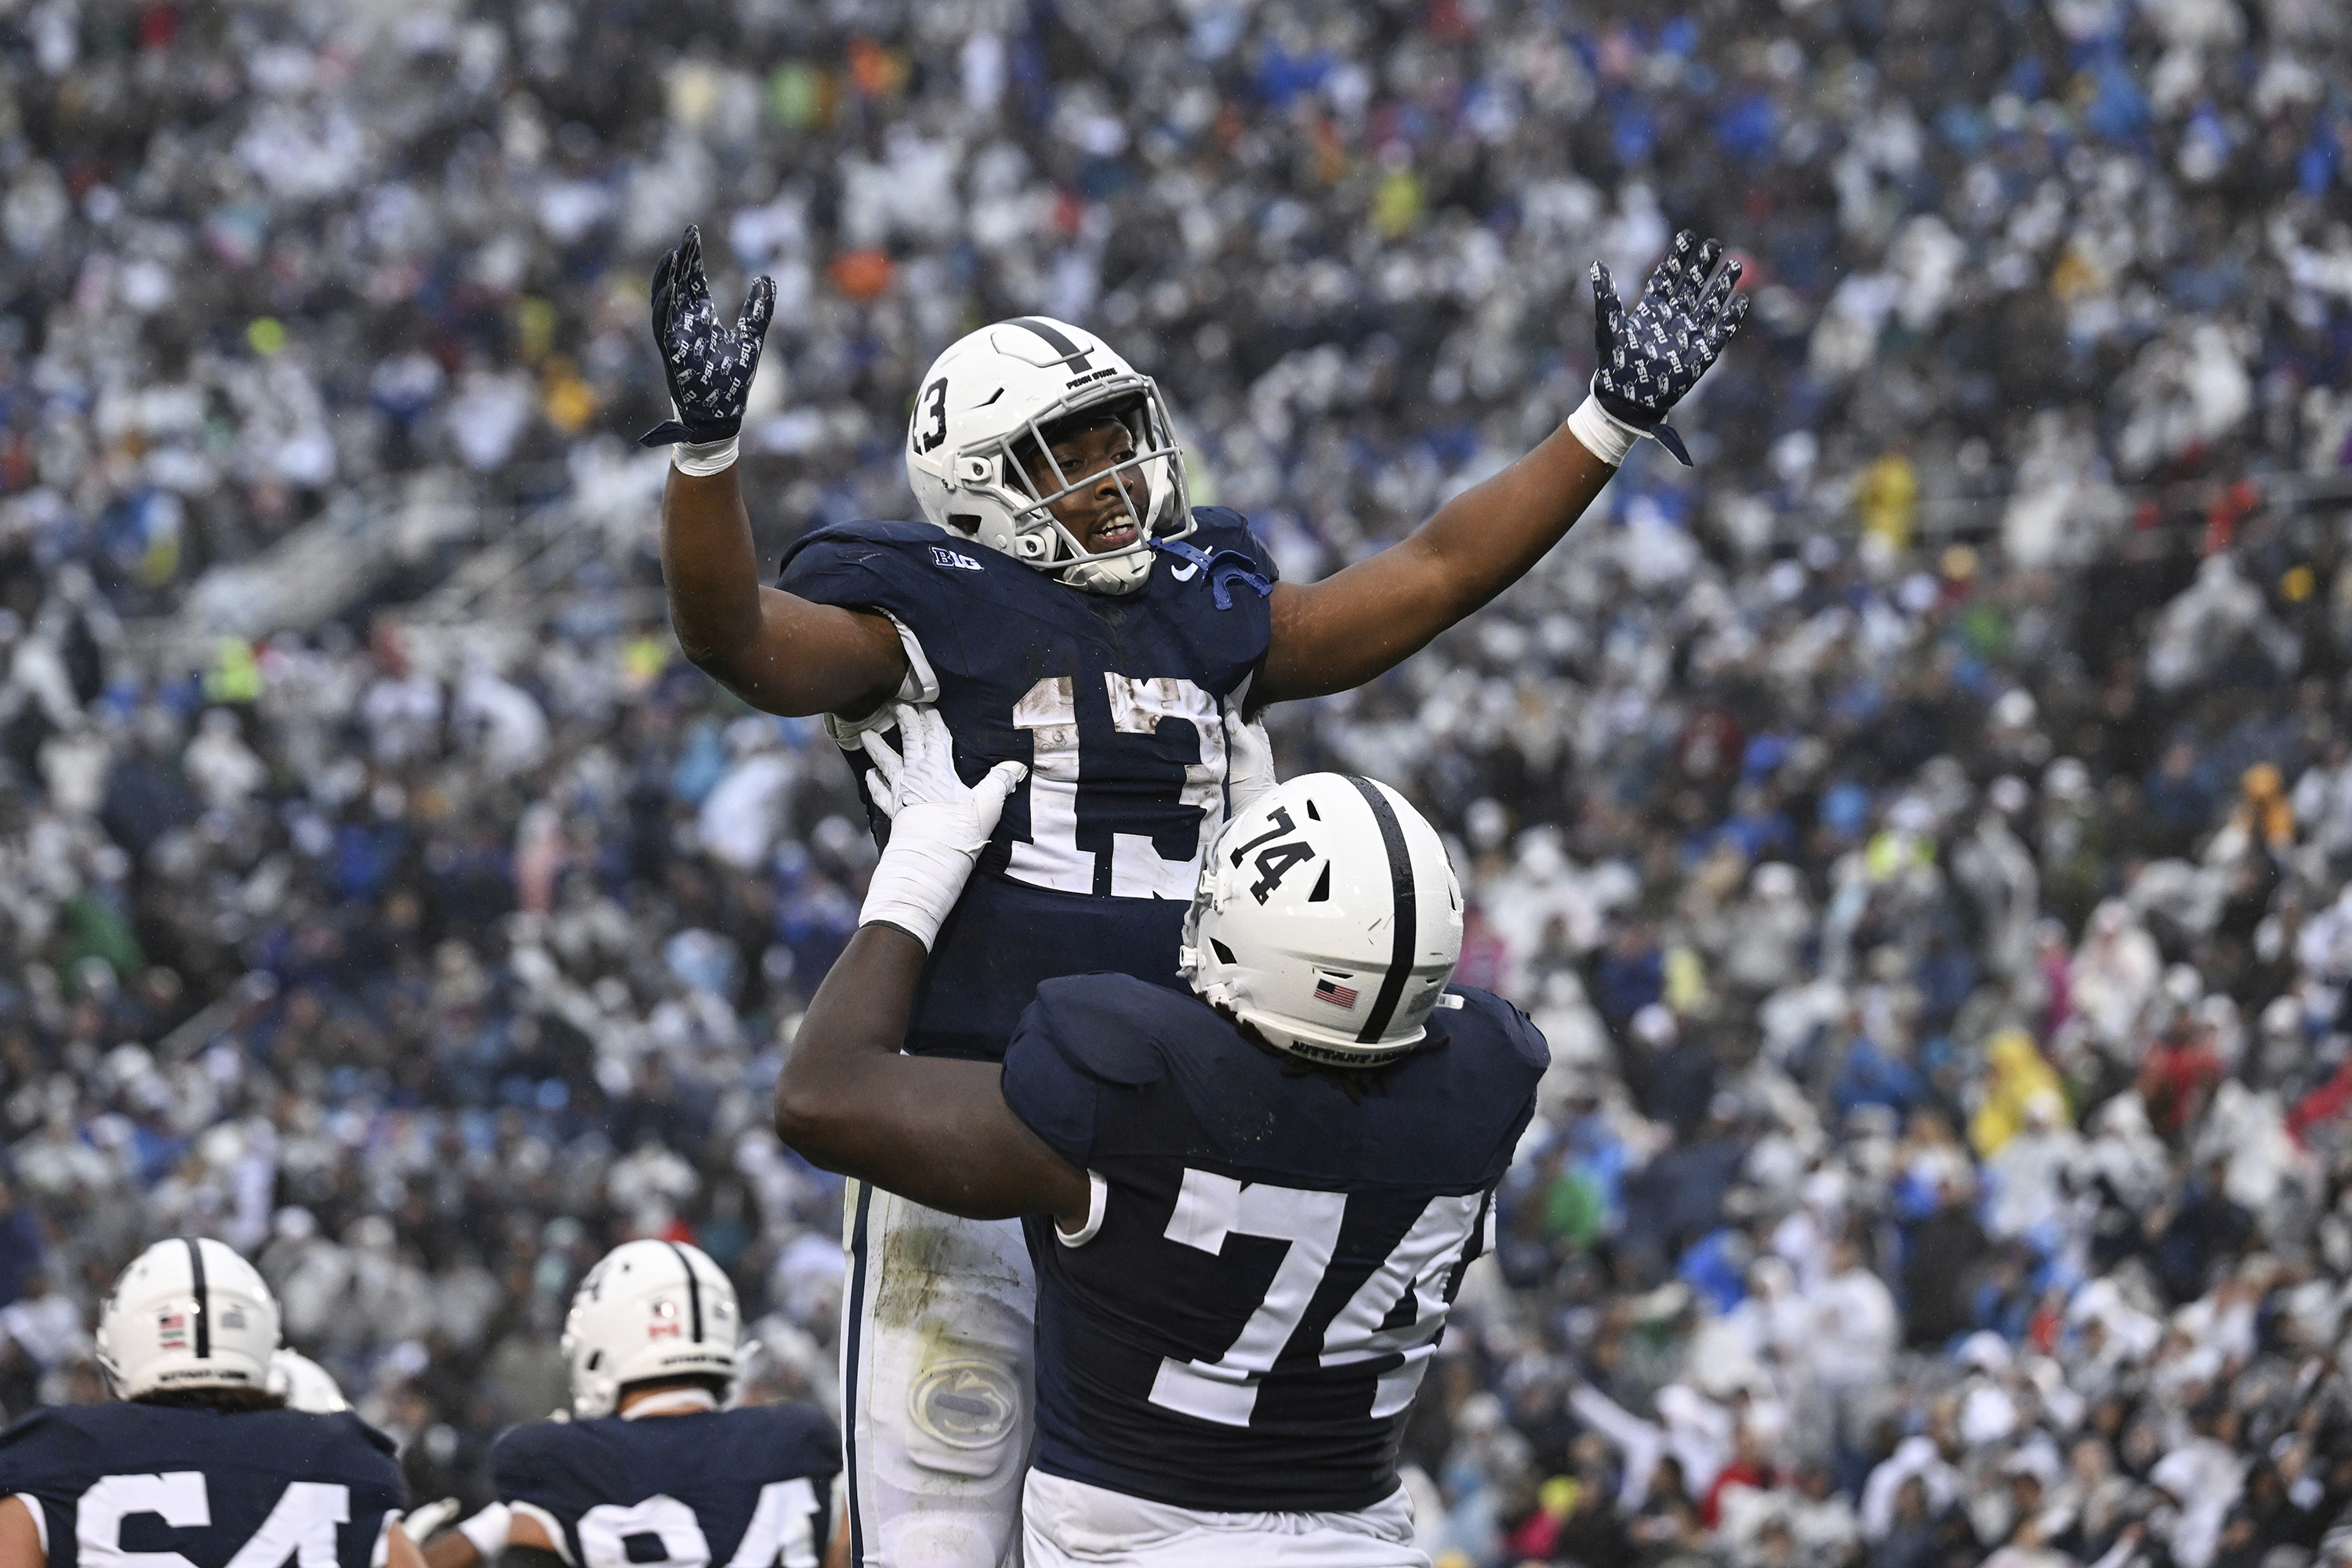 21 Penn State Football Players Receive New Jersey Numbers